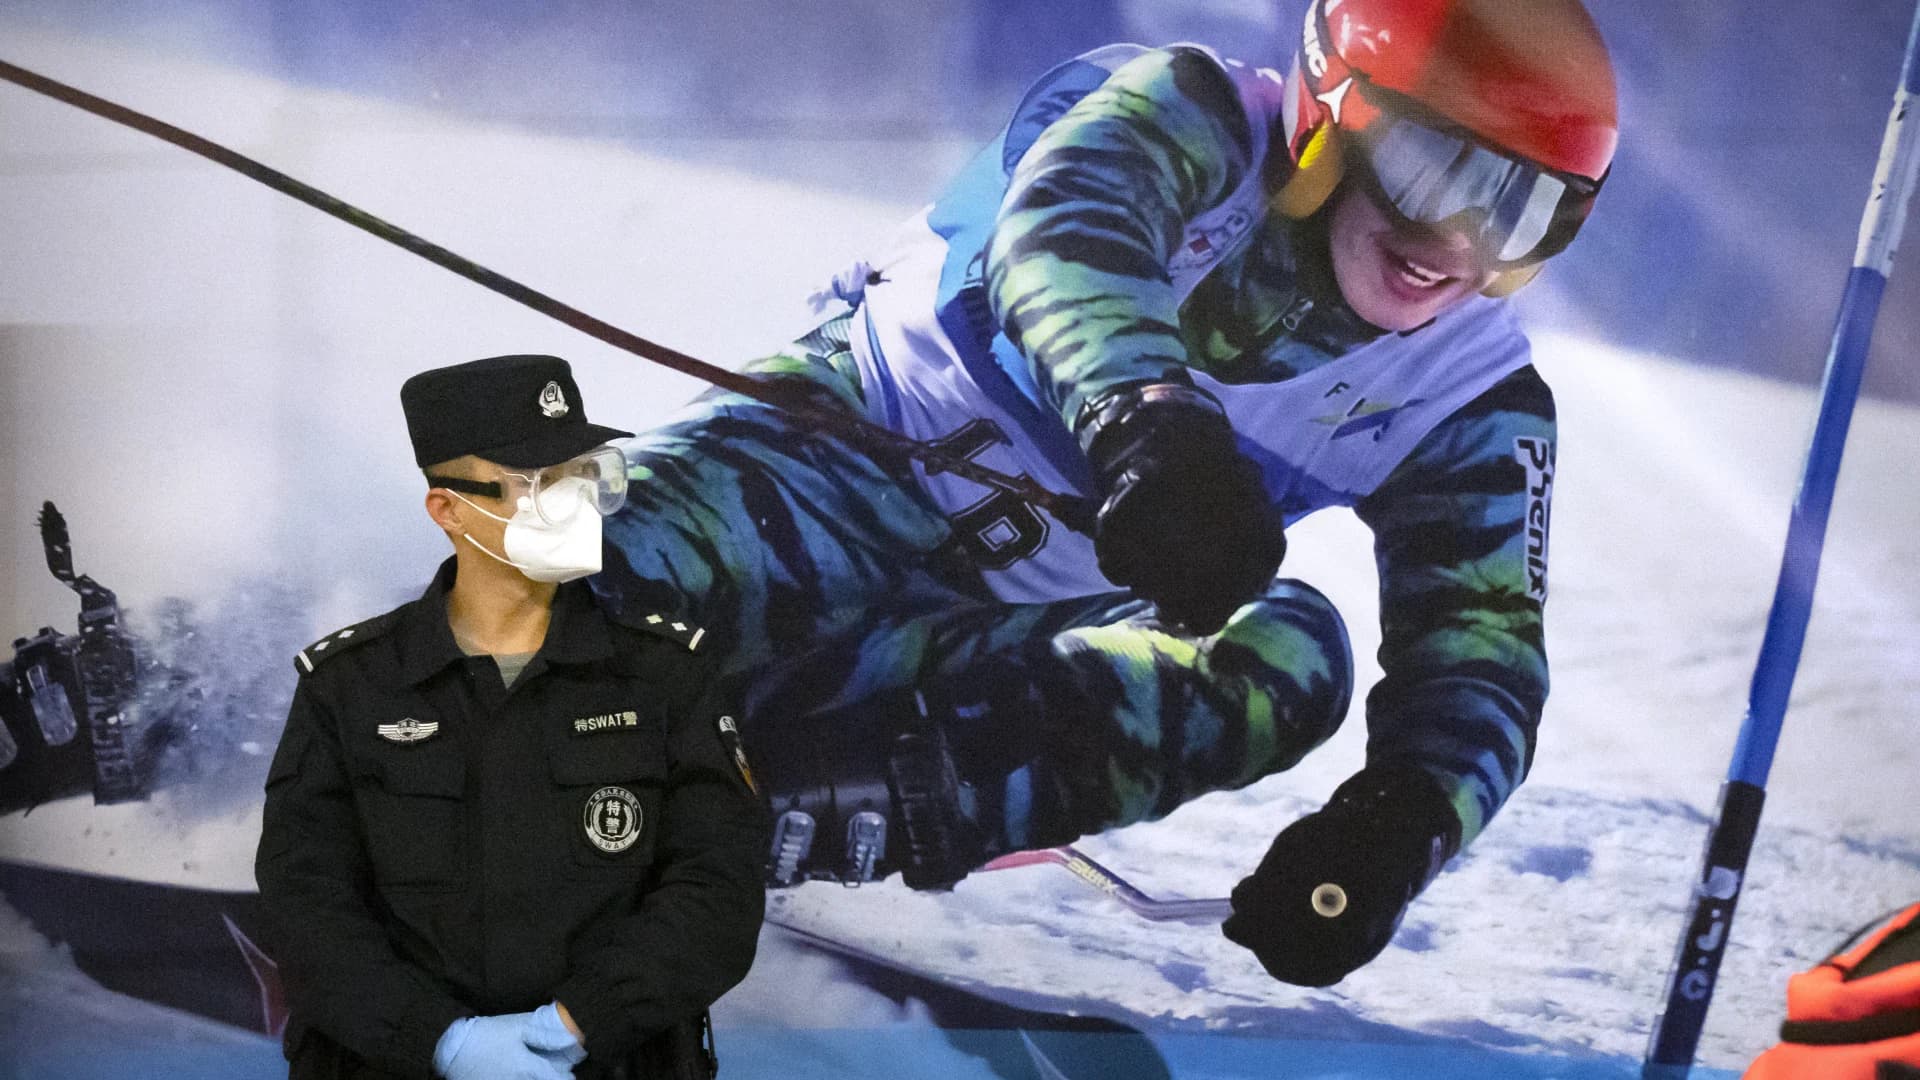 China concerned about omicron effect on Beijing Winter Games